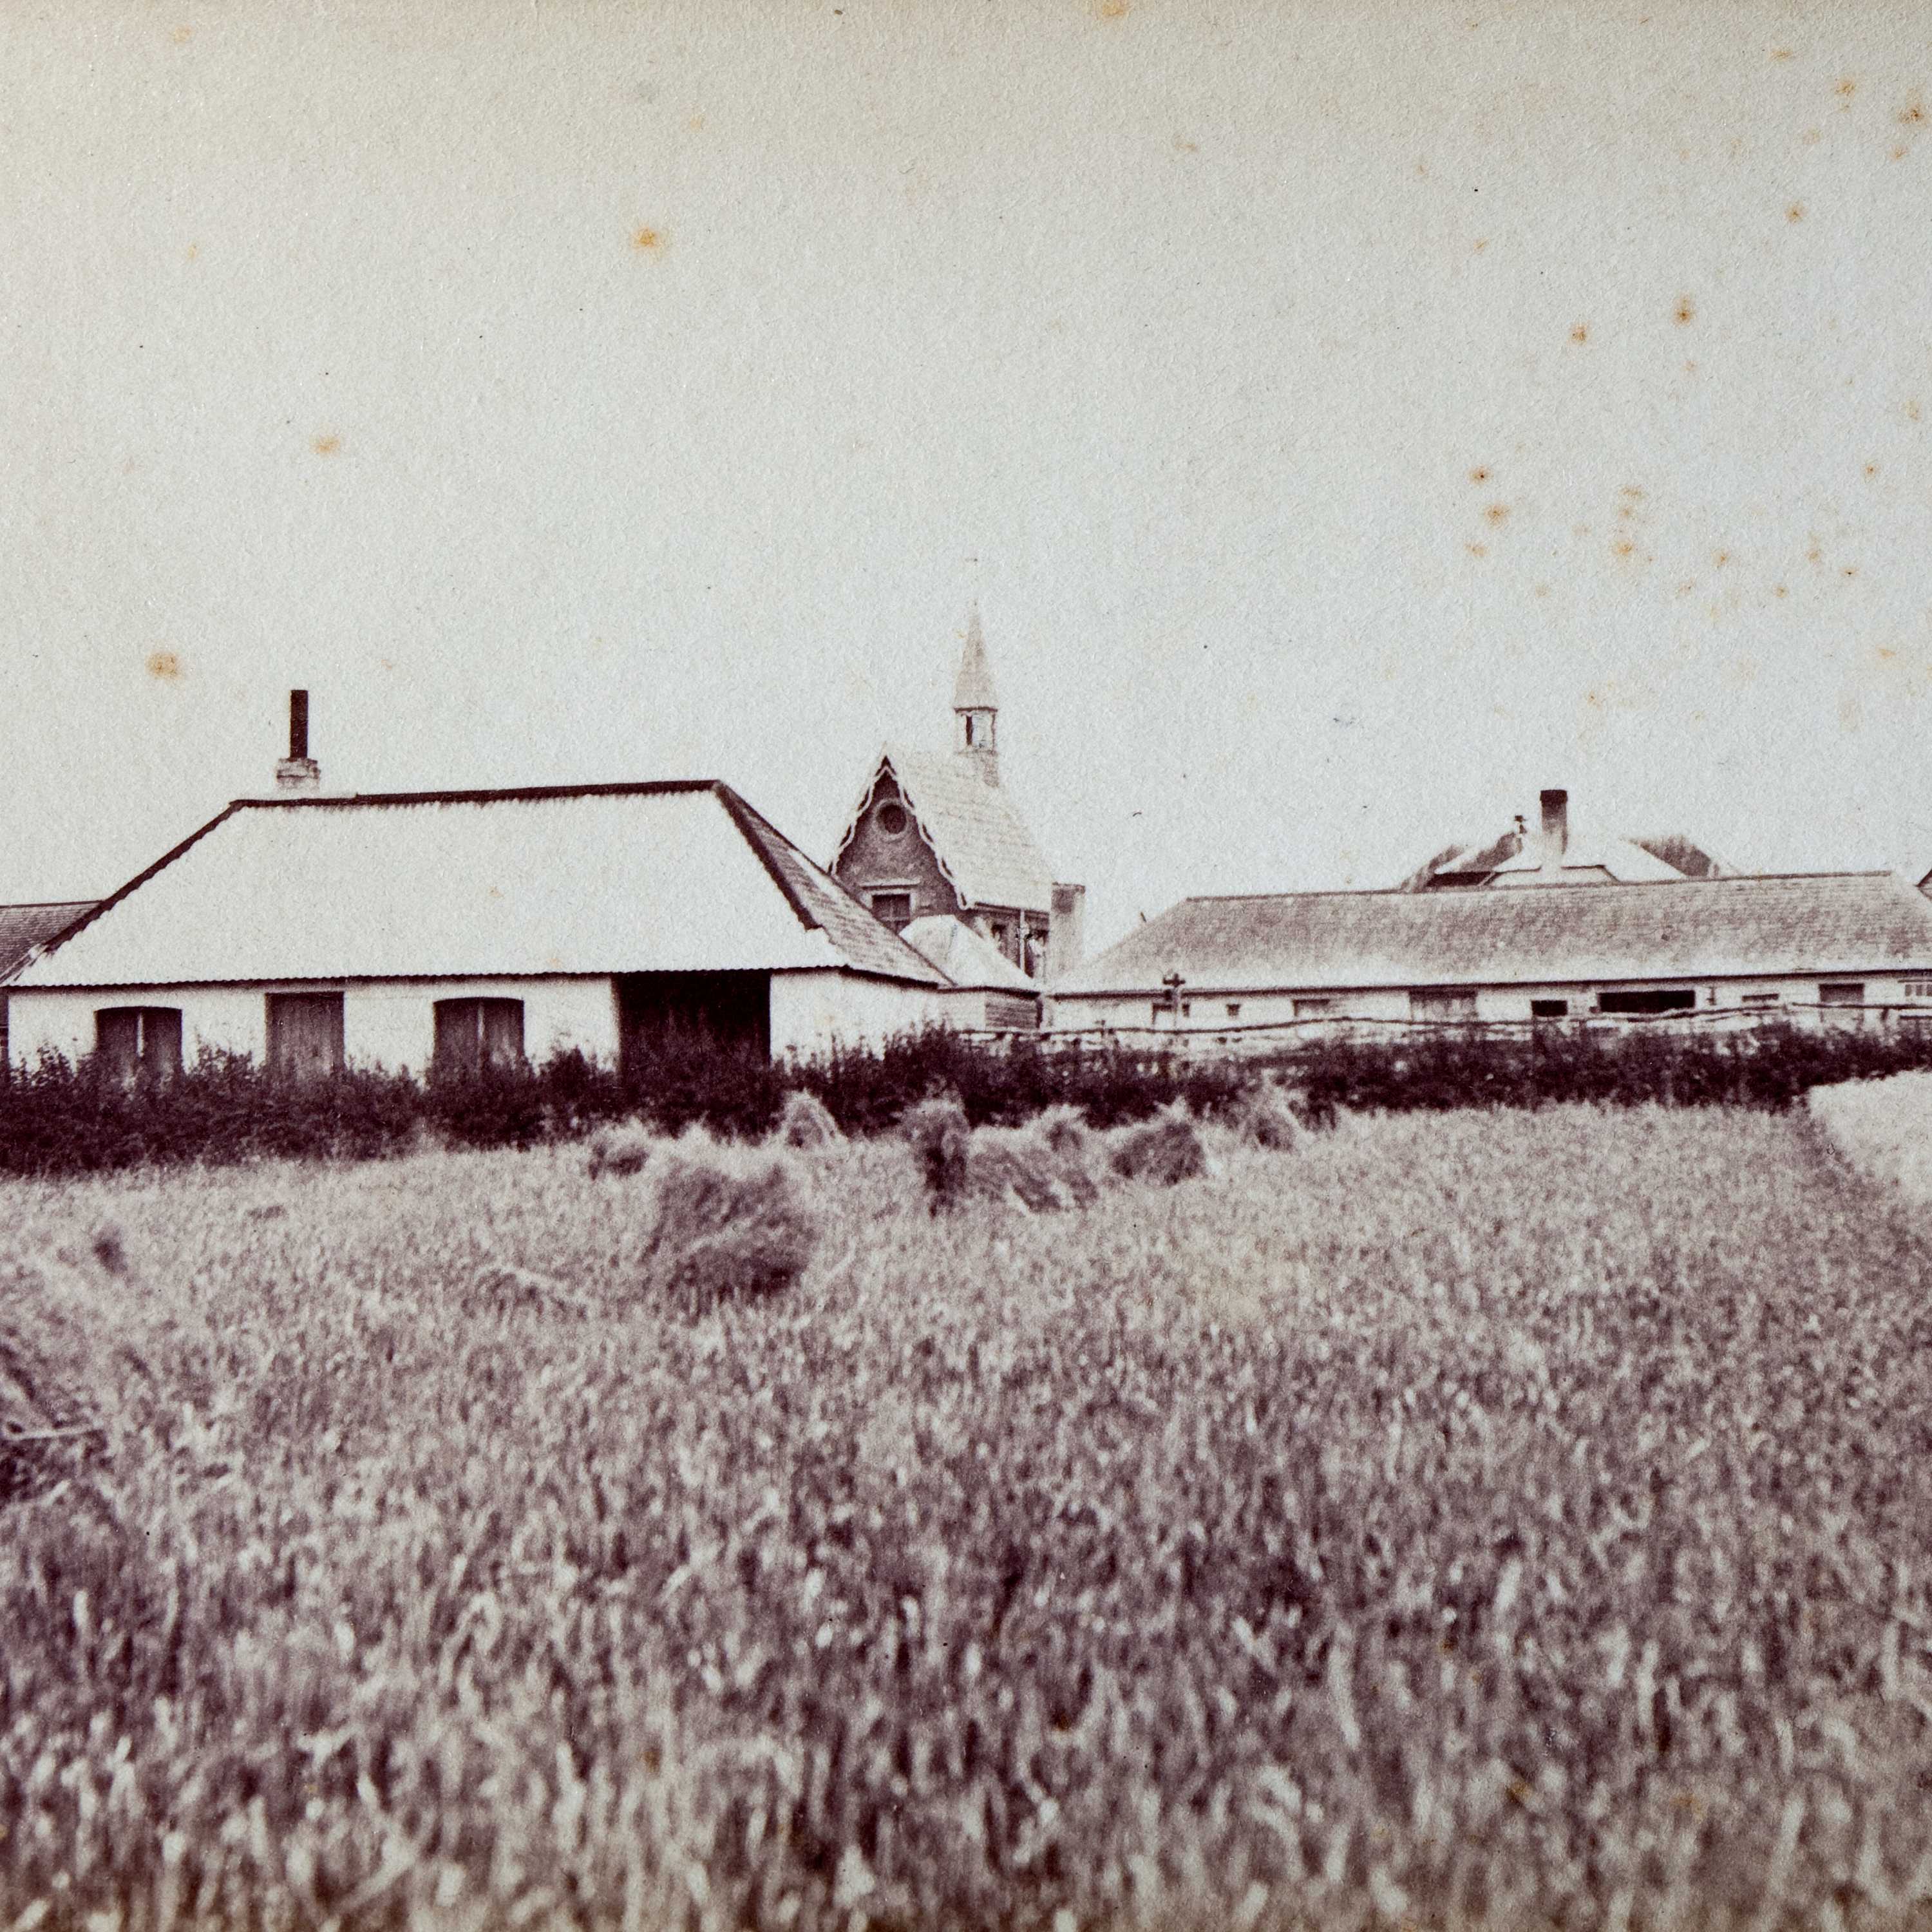 Blacksmith’s shop in the foreground with the convict quarters, carpenter’s hut, sawyer’s hut and chapel visible behind, c1880.